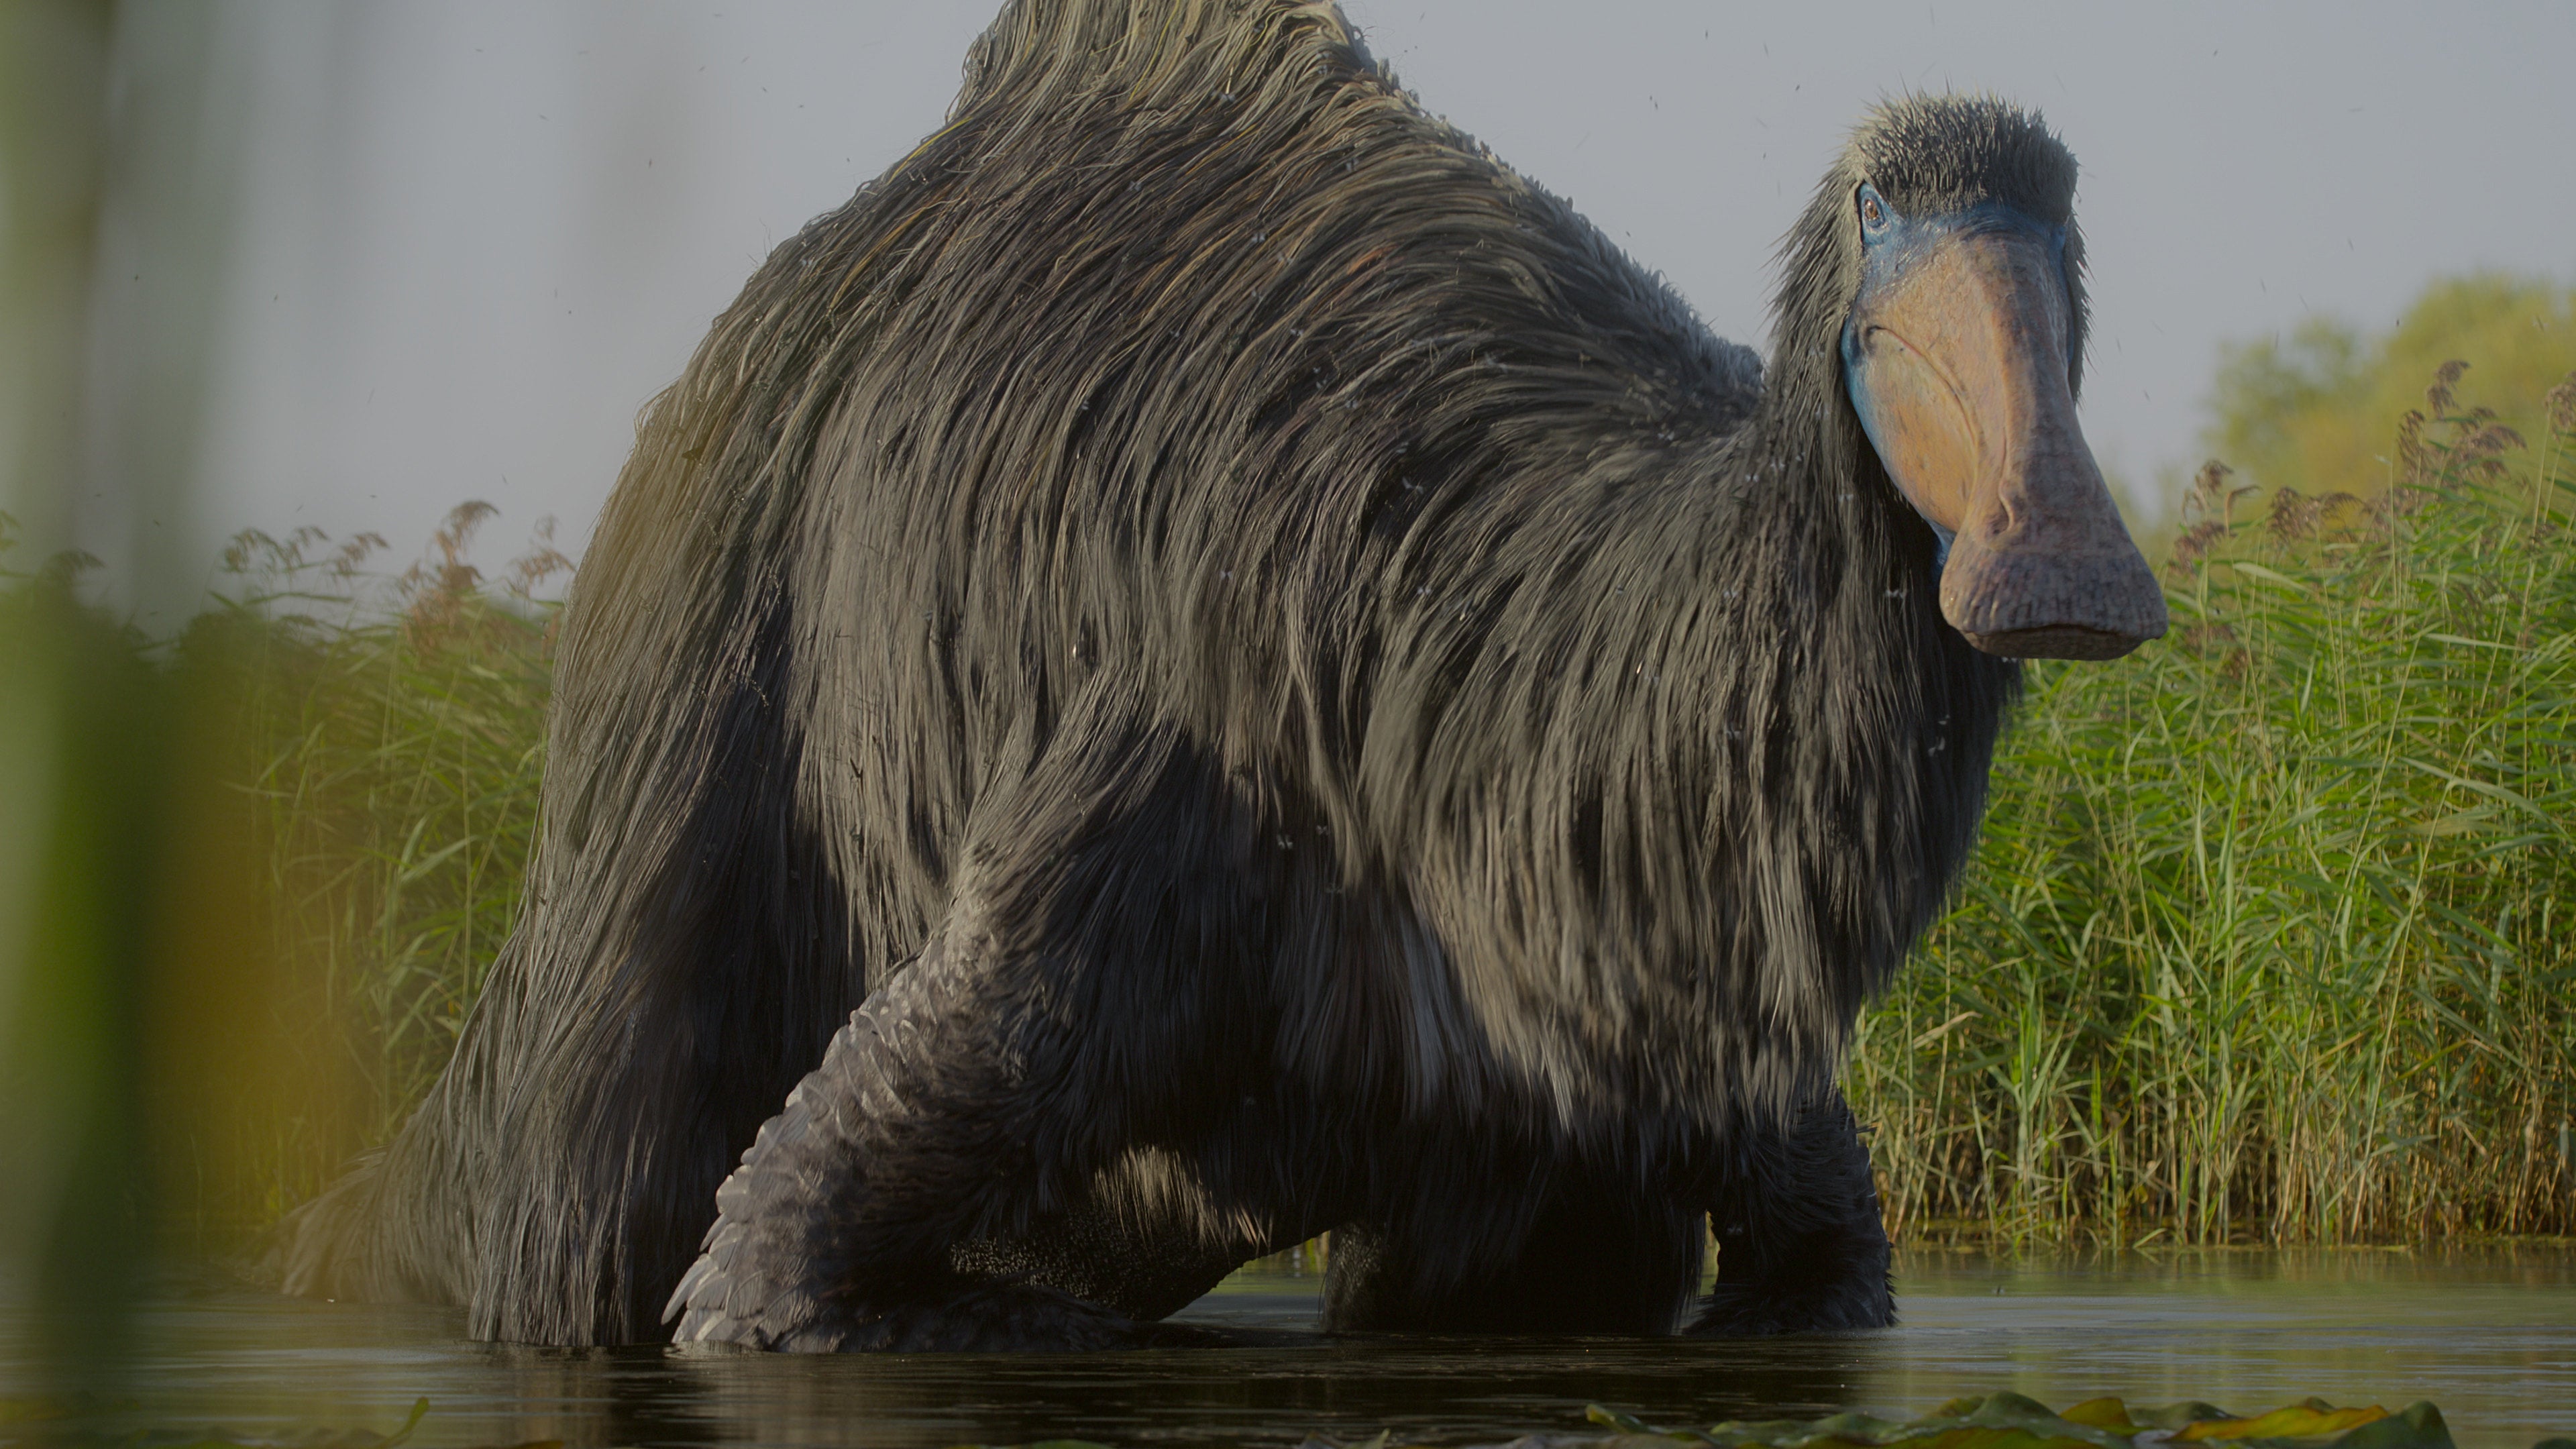 The massive, hairy Deinocheirus in a freshwater pond. (Image: Apple)